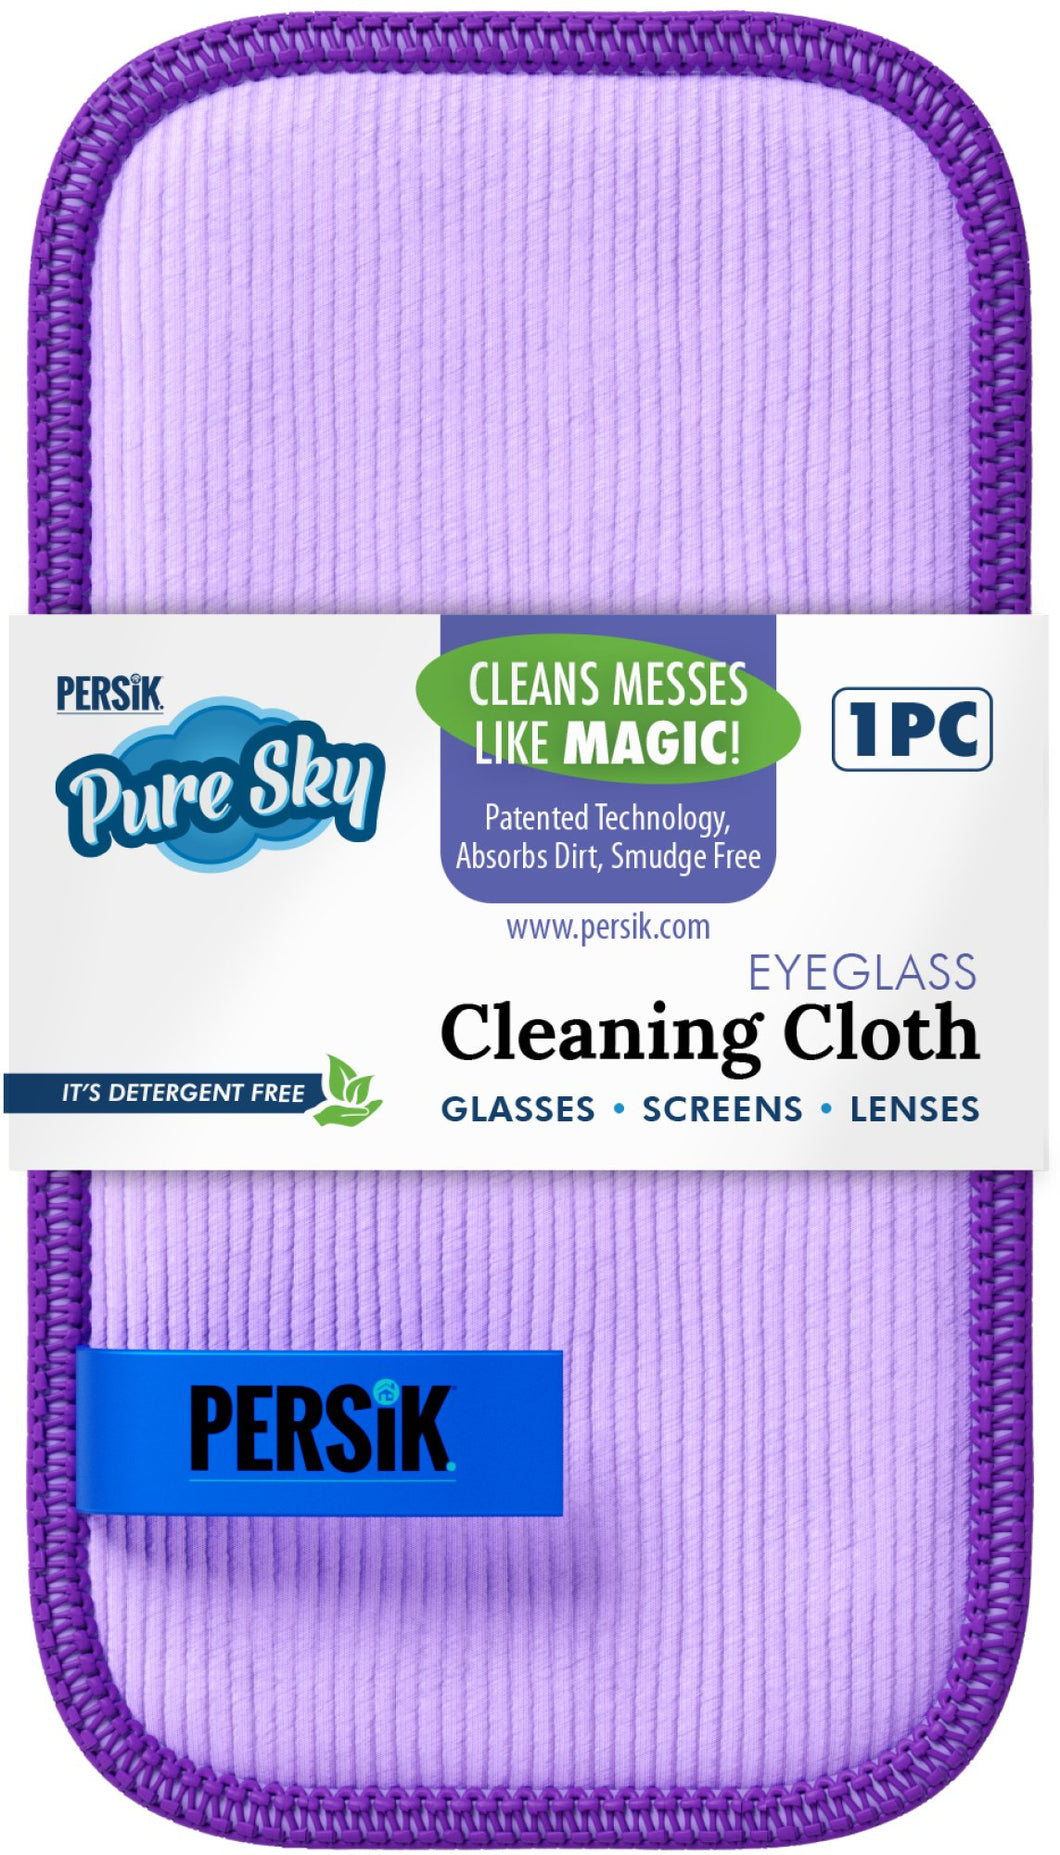 Pure-Sky Ultra Microfiber Eyeglass Cleaner Cloth – Streak Free Leaves no Wiping Marks, smudges, fingerprints - for Lenses, Screens, Cellphone, Tablets